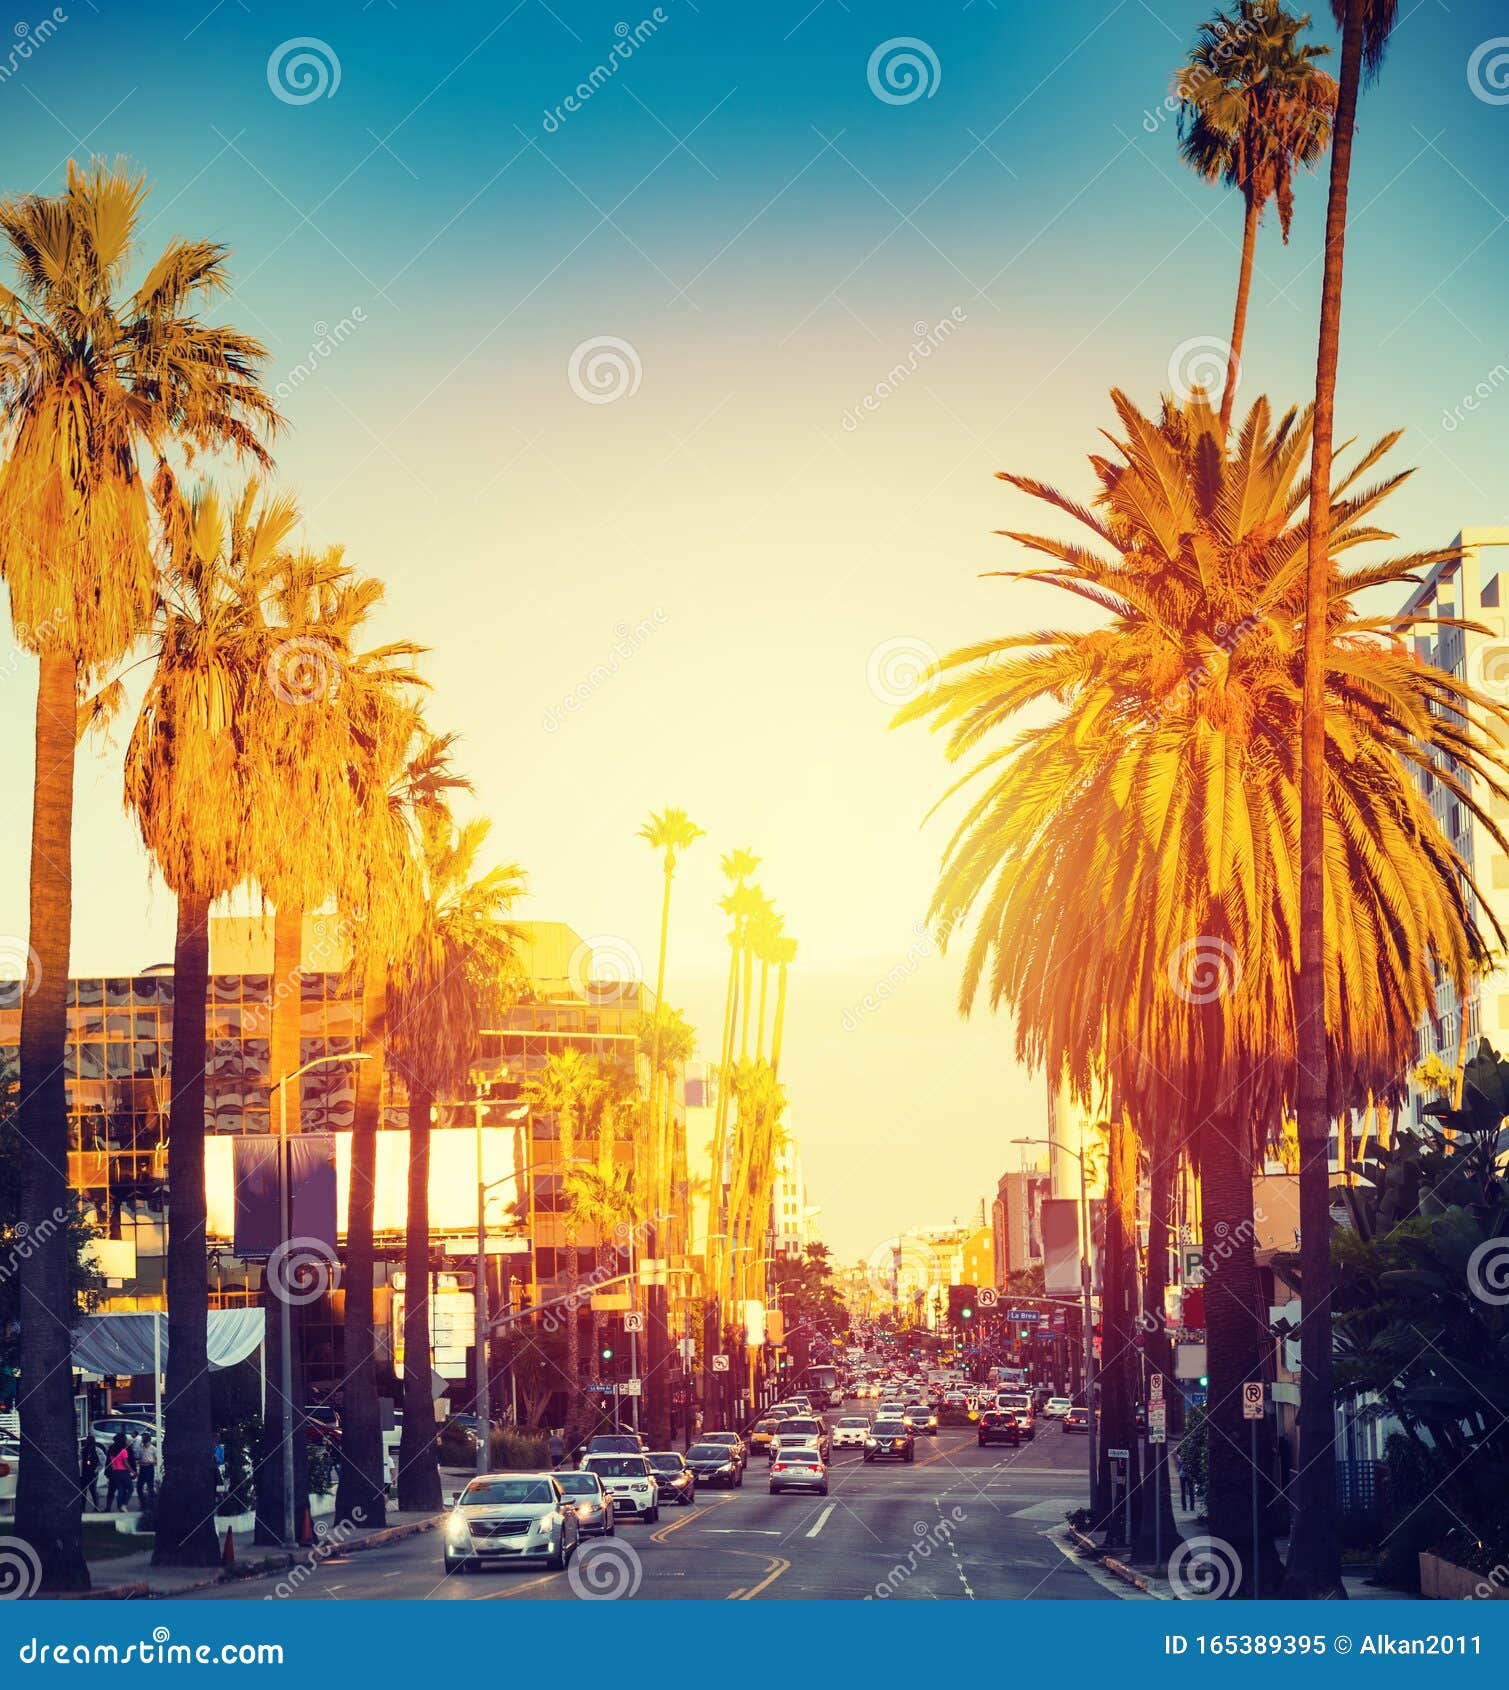 Colorful Sunset in Hollywood Stock Image - Image of sidewalk, street ...